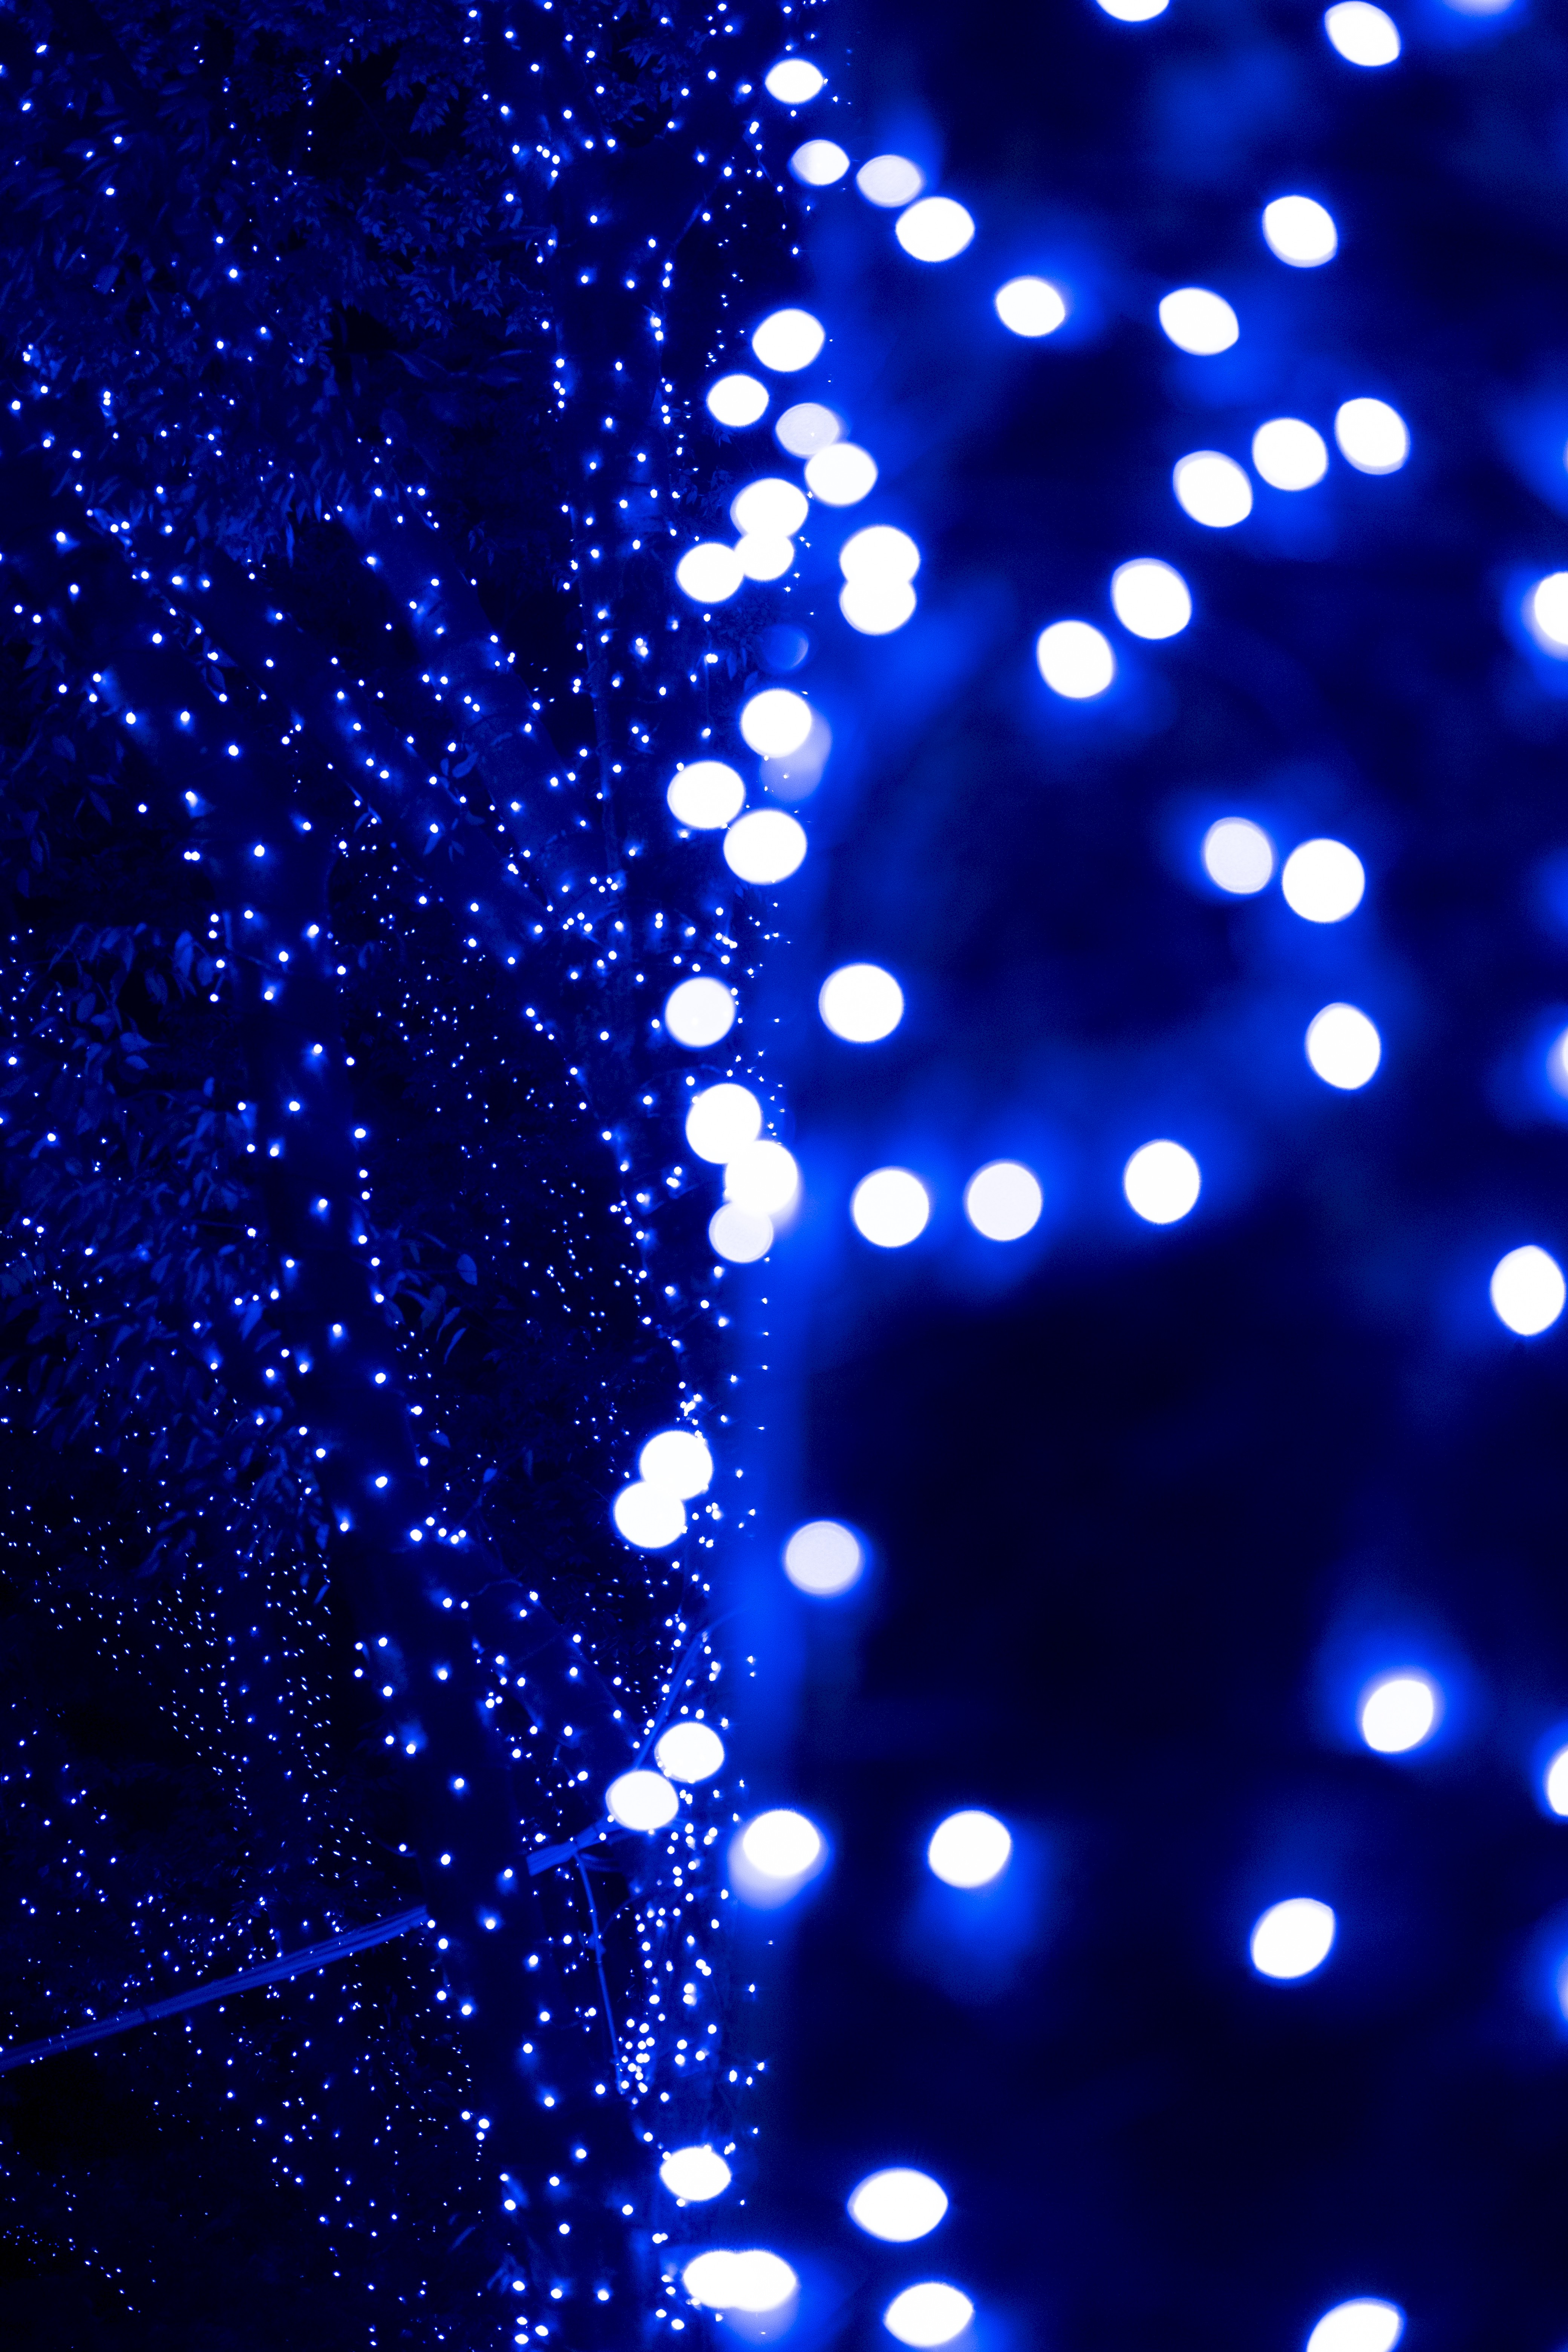 point, blue, glare, shine, light, miscellanea, miscellaneous, points, garland, bokeh, boquet wallpapers for tablet